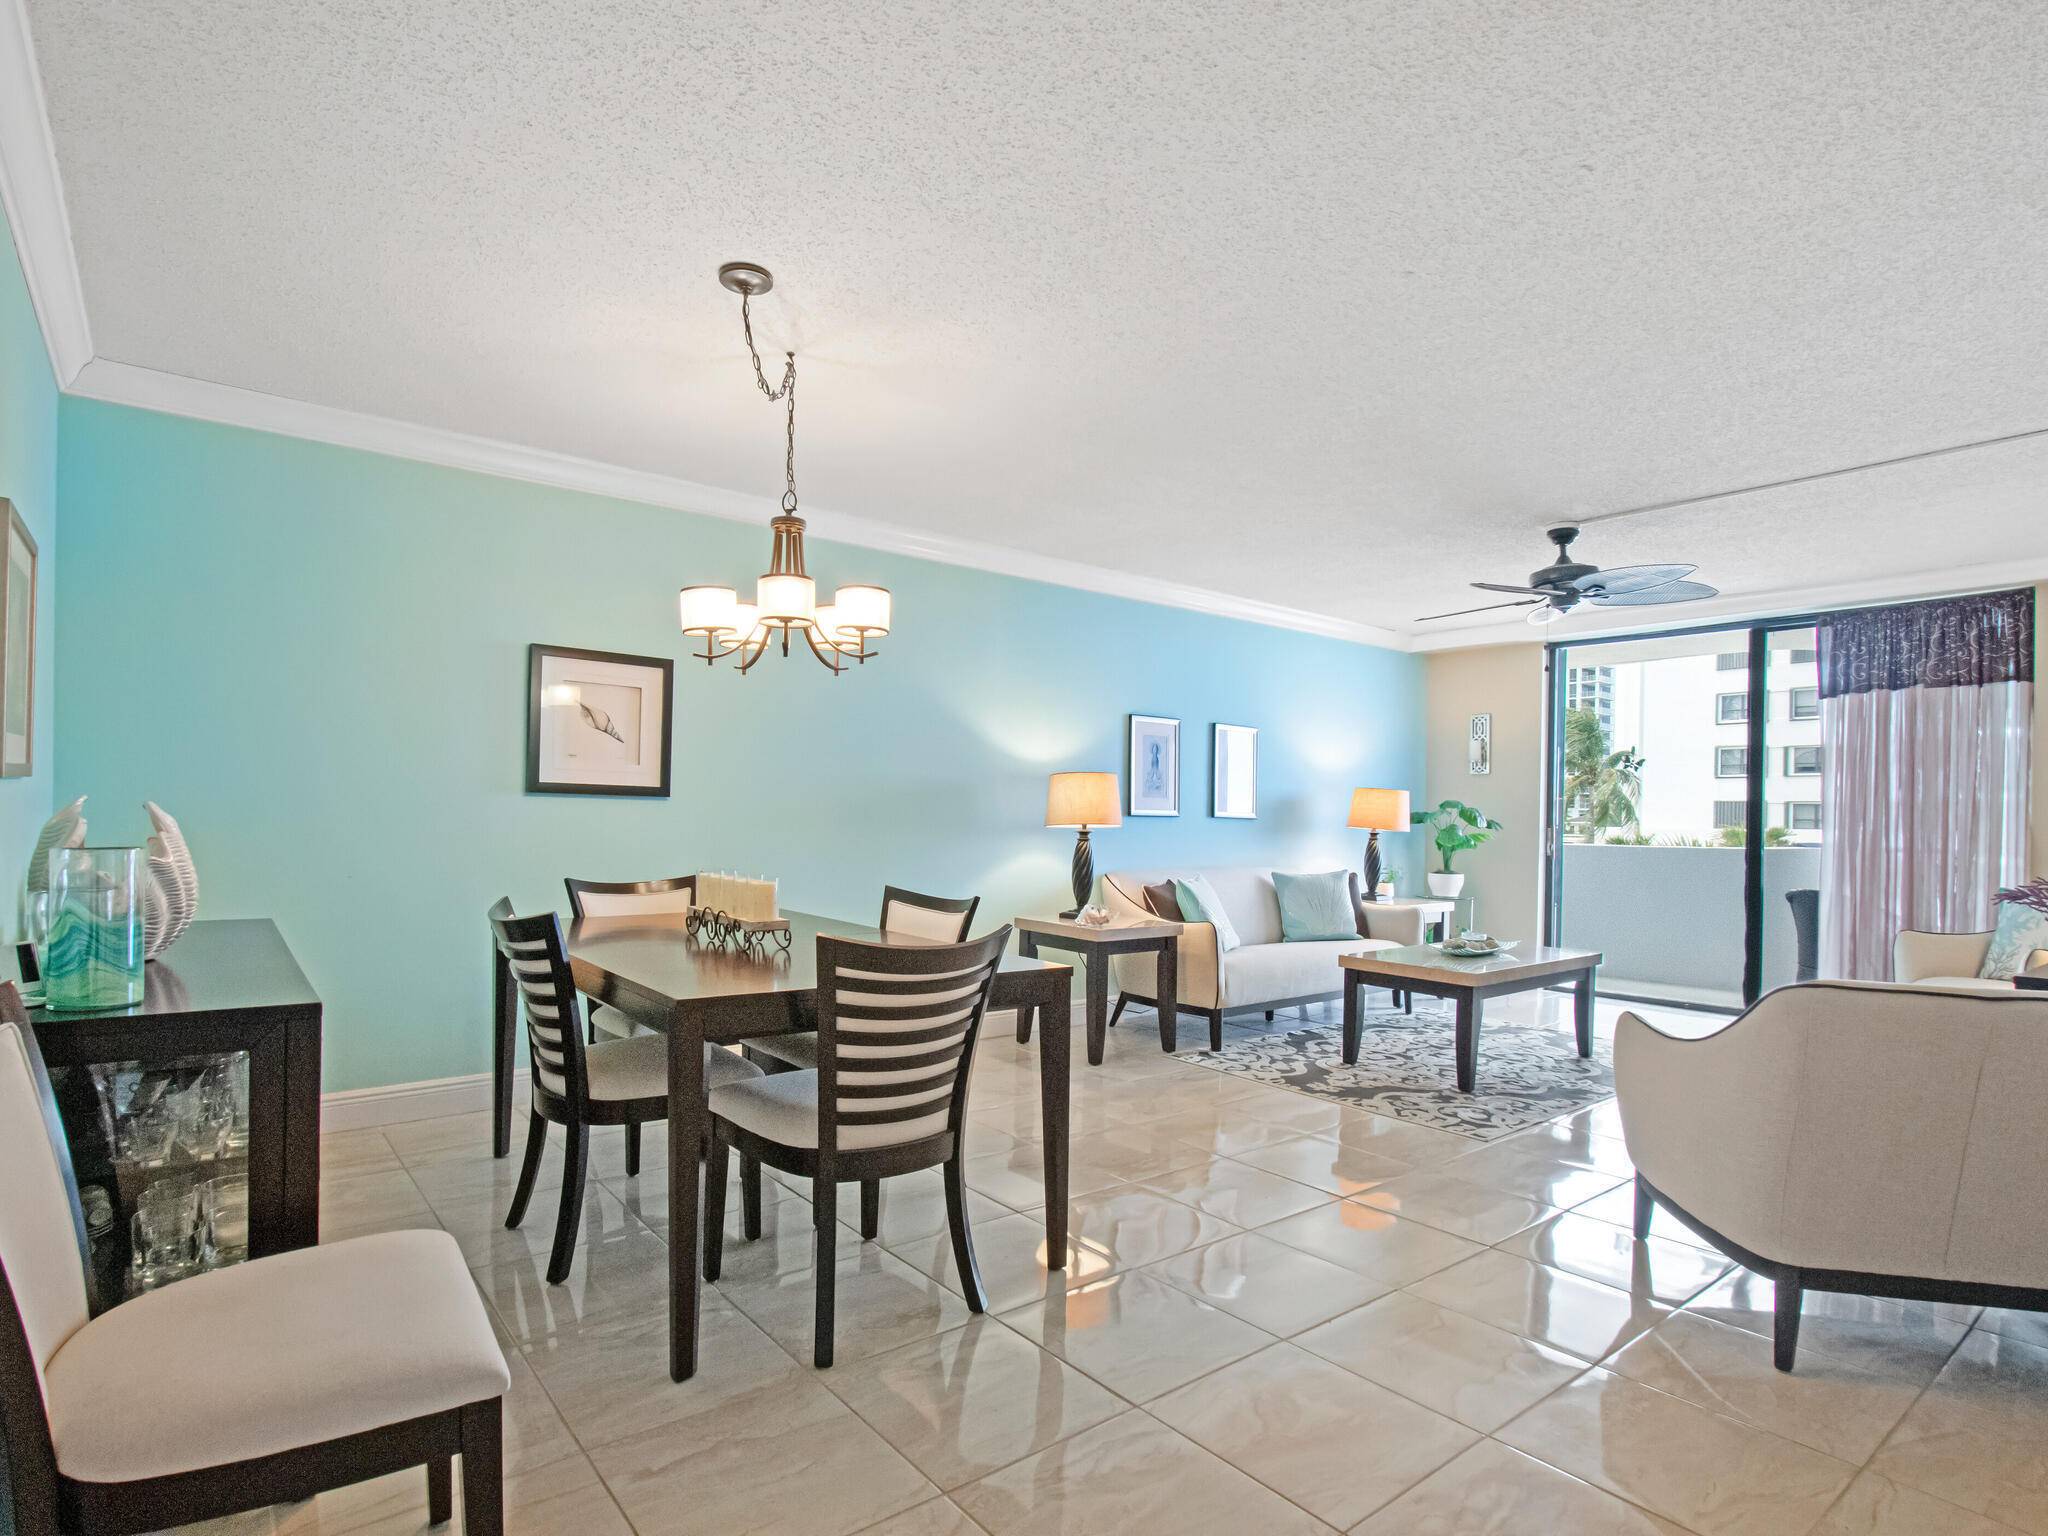 PRICED TO SELL Live the luxurious life at Old Port Cove in the heart of North Palm Beach, FL.